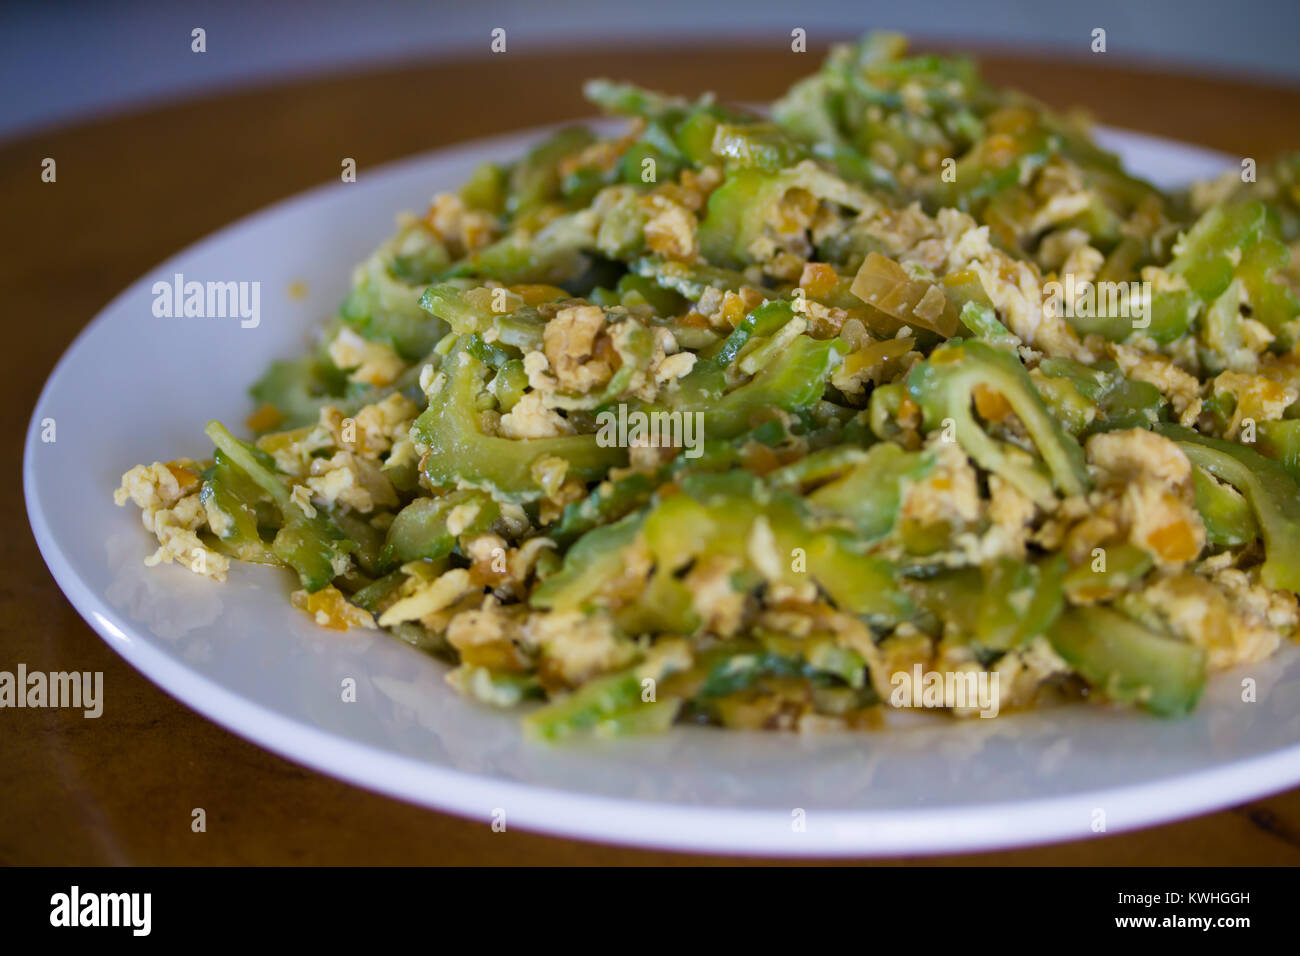 Cooked Ampalaya vegetable.Some research supports it to contain substances that decreases blood glucose for Type 2 Diabetics. Stock Photo